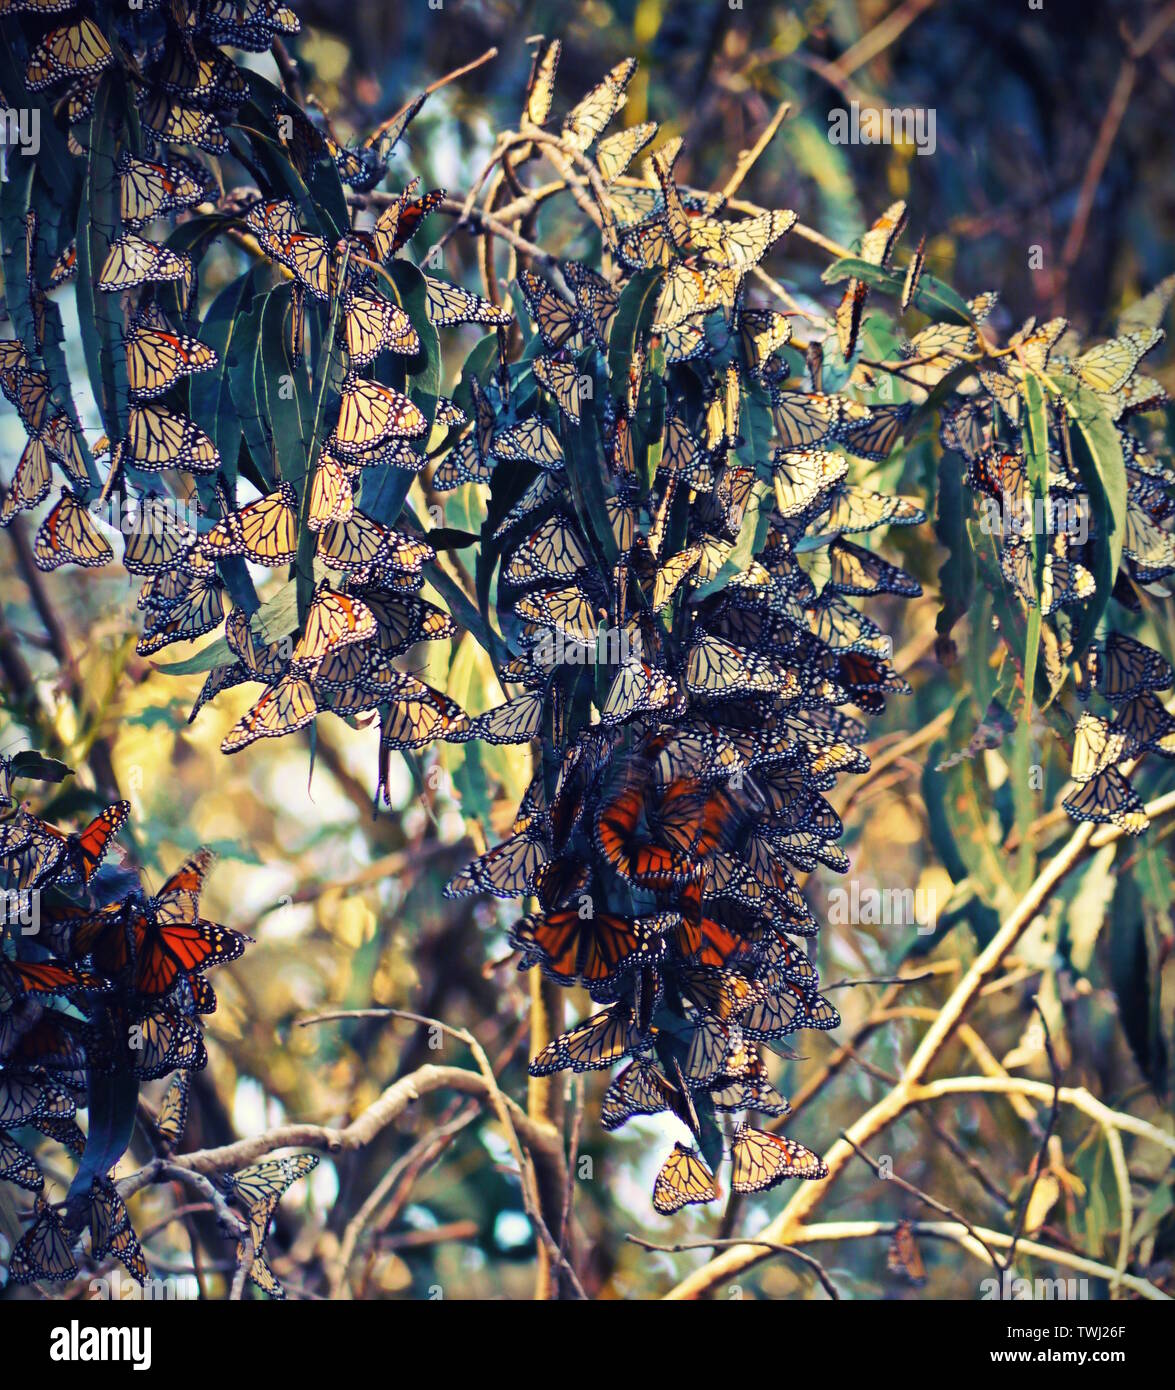 Monarch Butterfly Migration, Pismo California United States Stock Photo